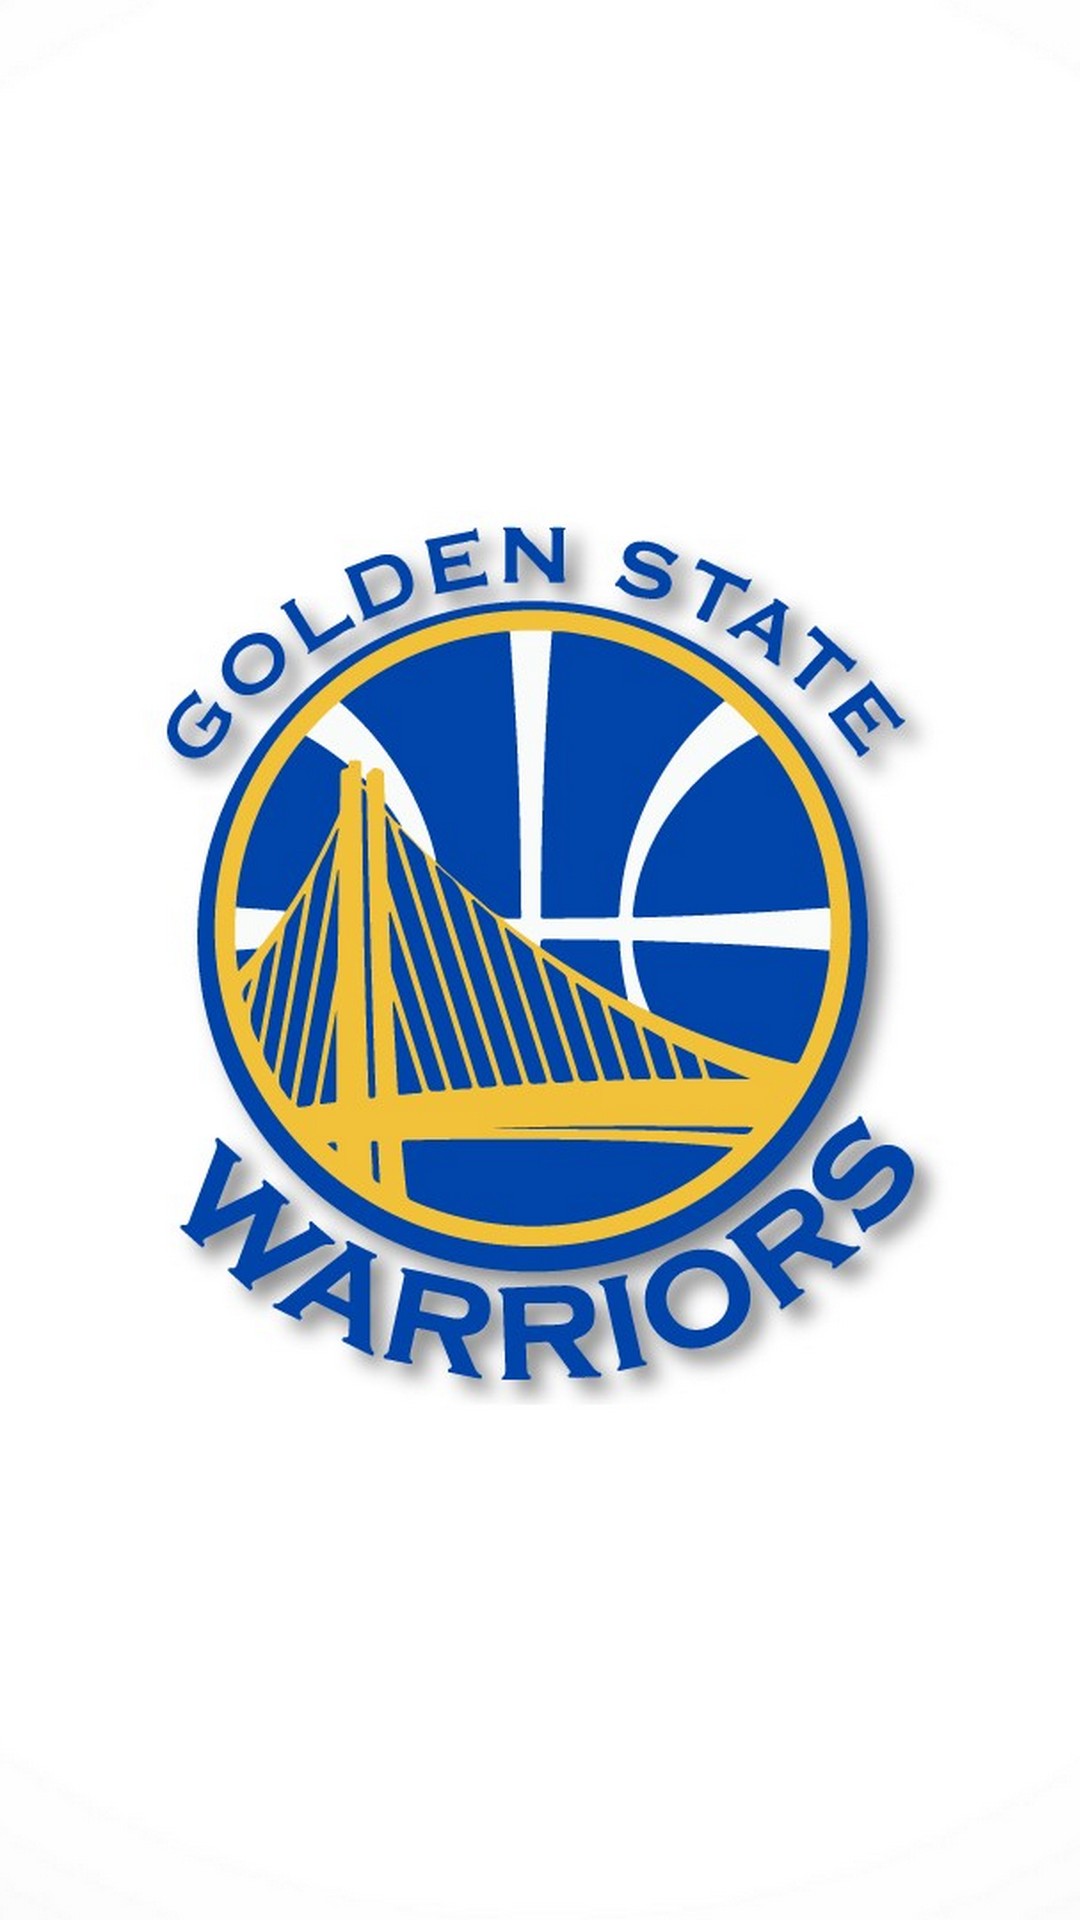 Golden State Warriors HD Wallpaper For iPhone with image resolution 1080x1920 pixel. You can use this wallpaper as background for your desktop Computer Screensavers, Android or iPhone smartphones